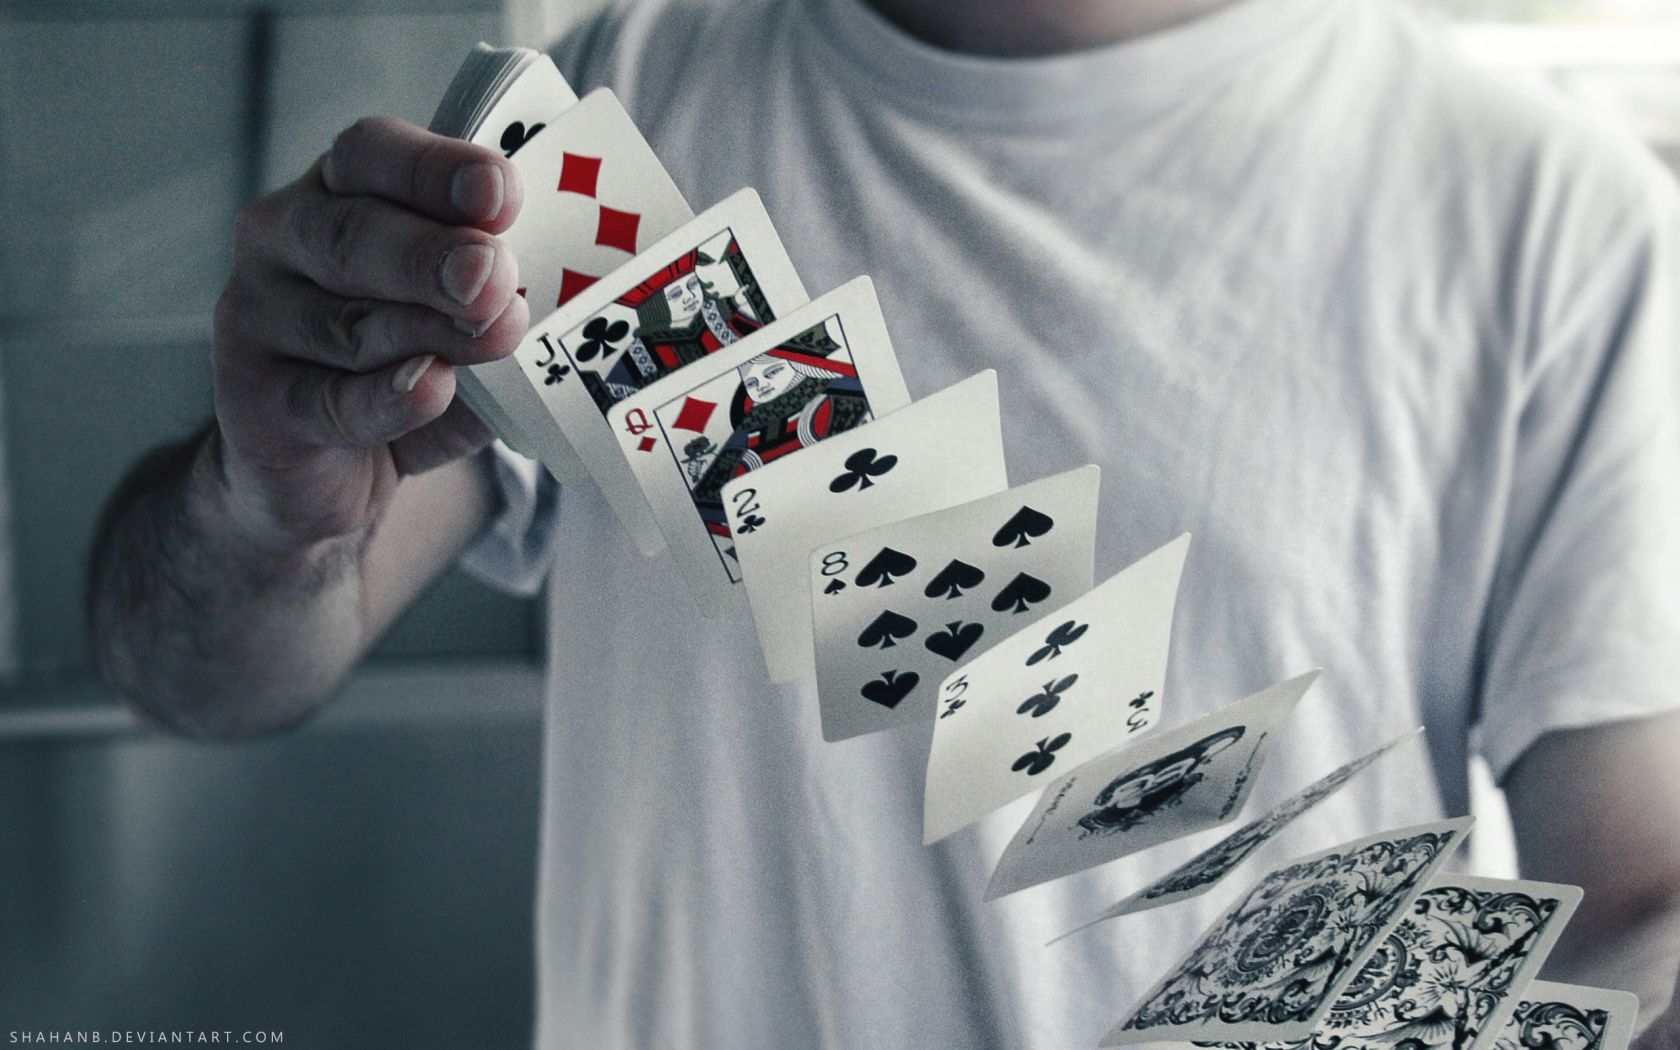 Cards Cardistry Ideas. Cardistry, Cards, Cardistry Playing Cards